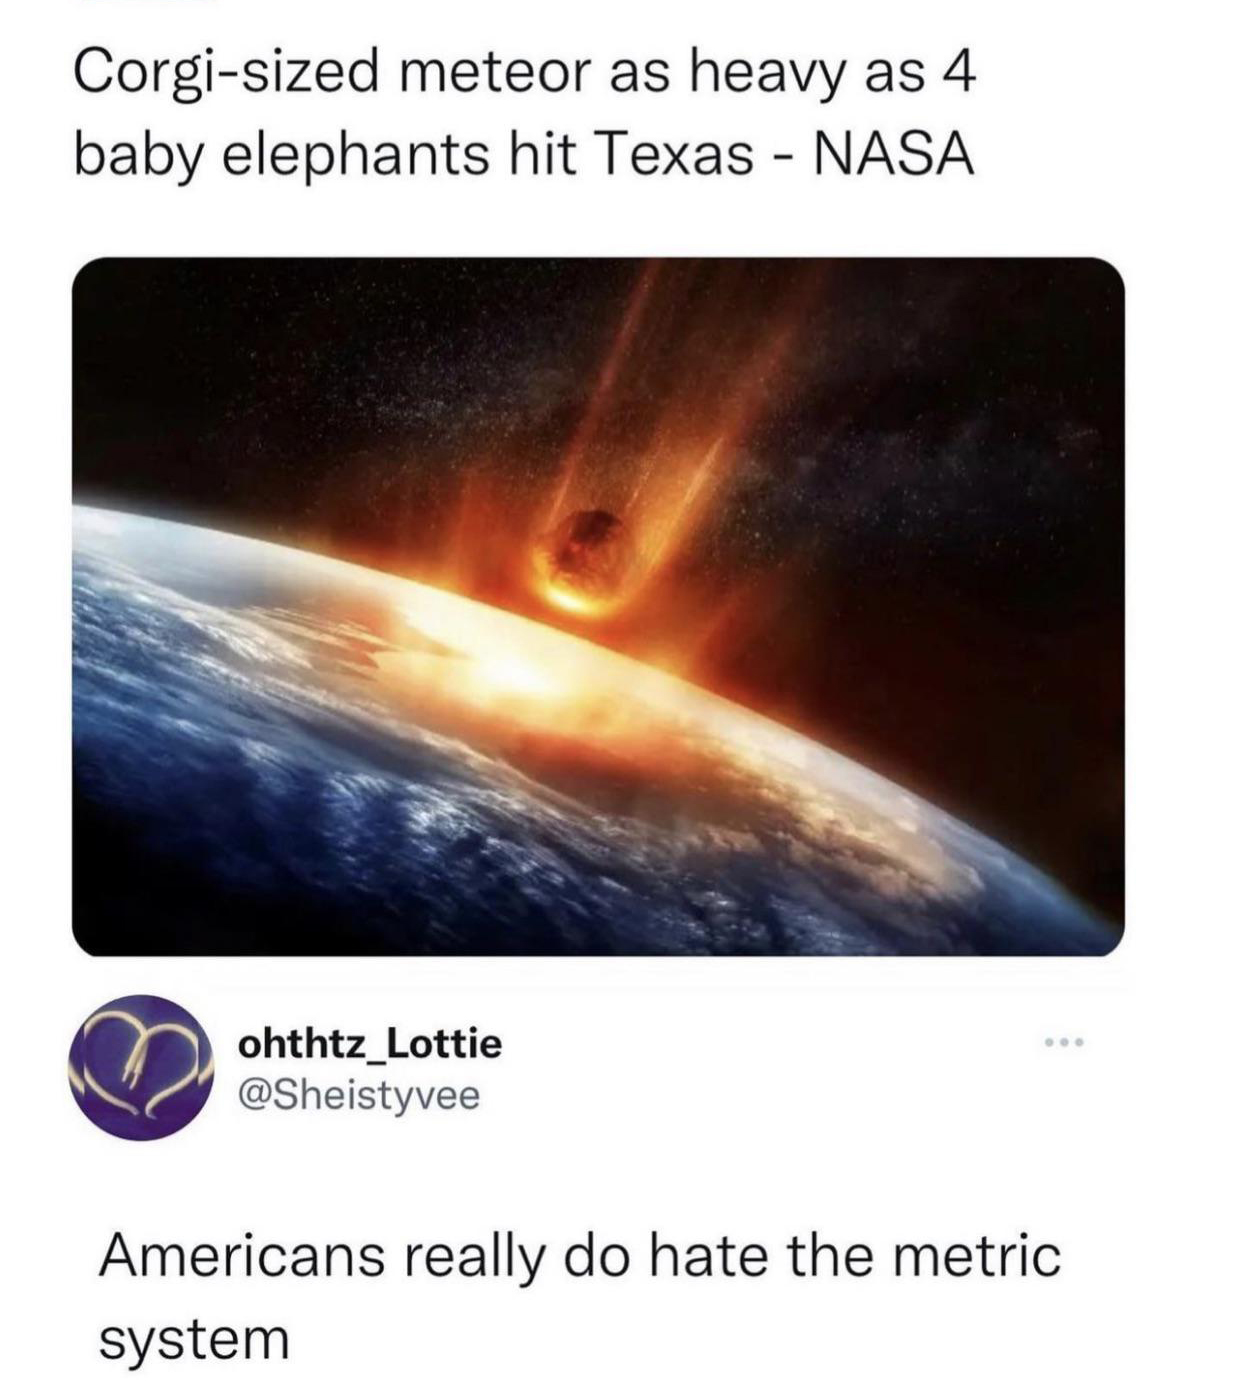 funny memes and pics - gold mine australia old - Corgisized meteor as heavy as 4 baby elephants hit Texas Nasa ohthtz_Lottie Americans really do hate the metric system